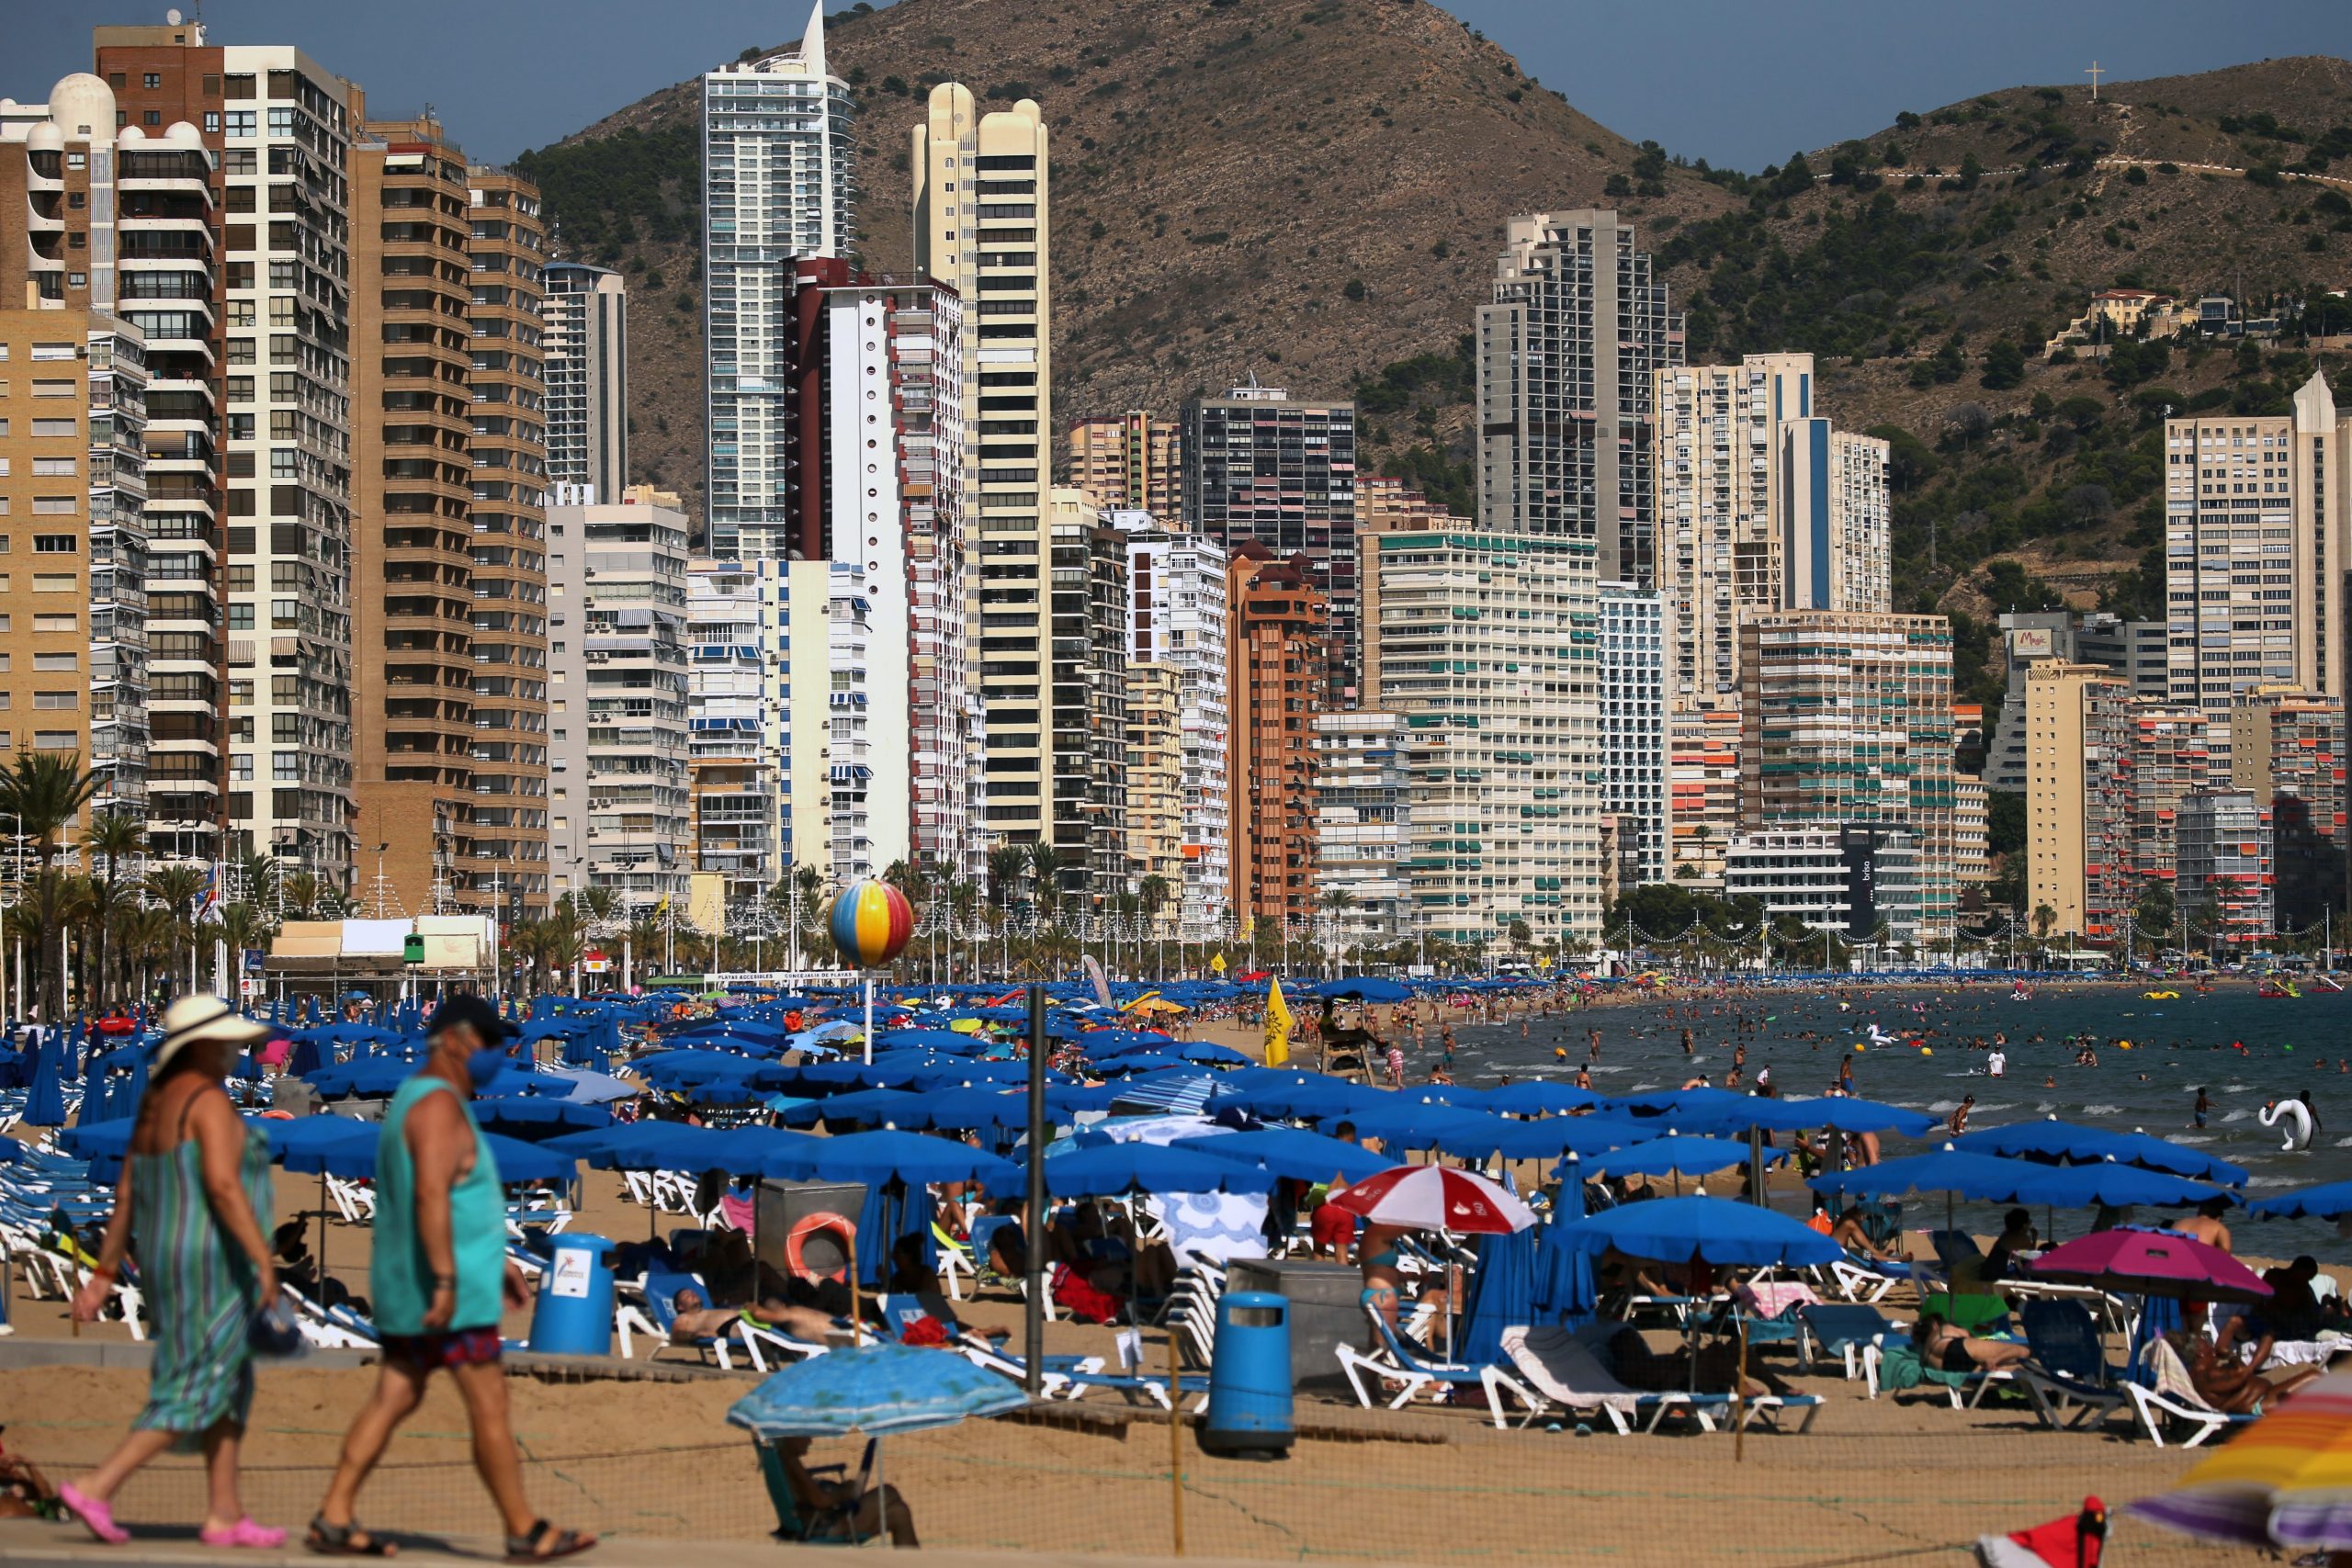 Hotels in Benidorm and Costa Blanca report no 'explosion' in bookings since UK changed amber travel rules for Spain